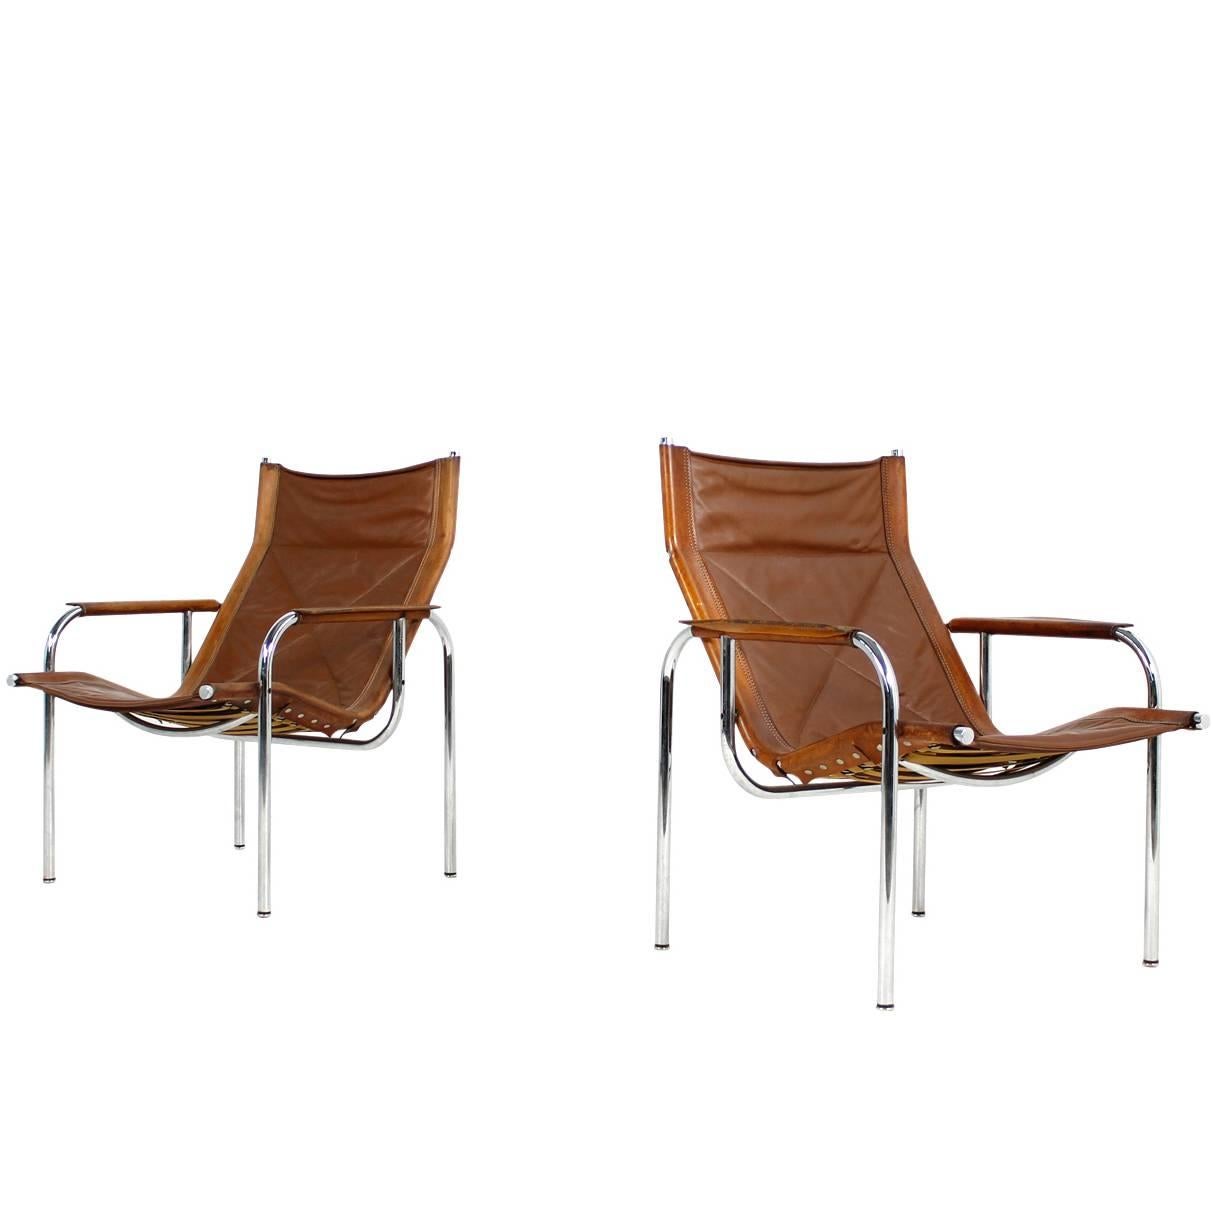 Pair of 1970s Vintage Hans Eichenberger Cognac Leather and Chrome Lounge Chairs